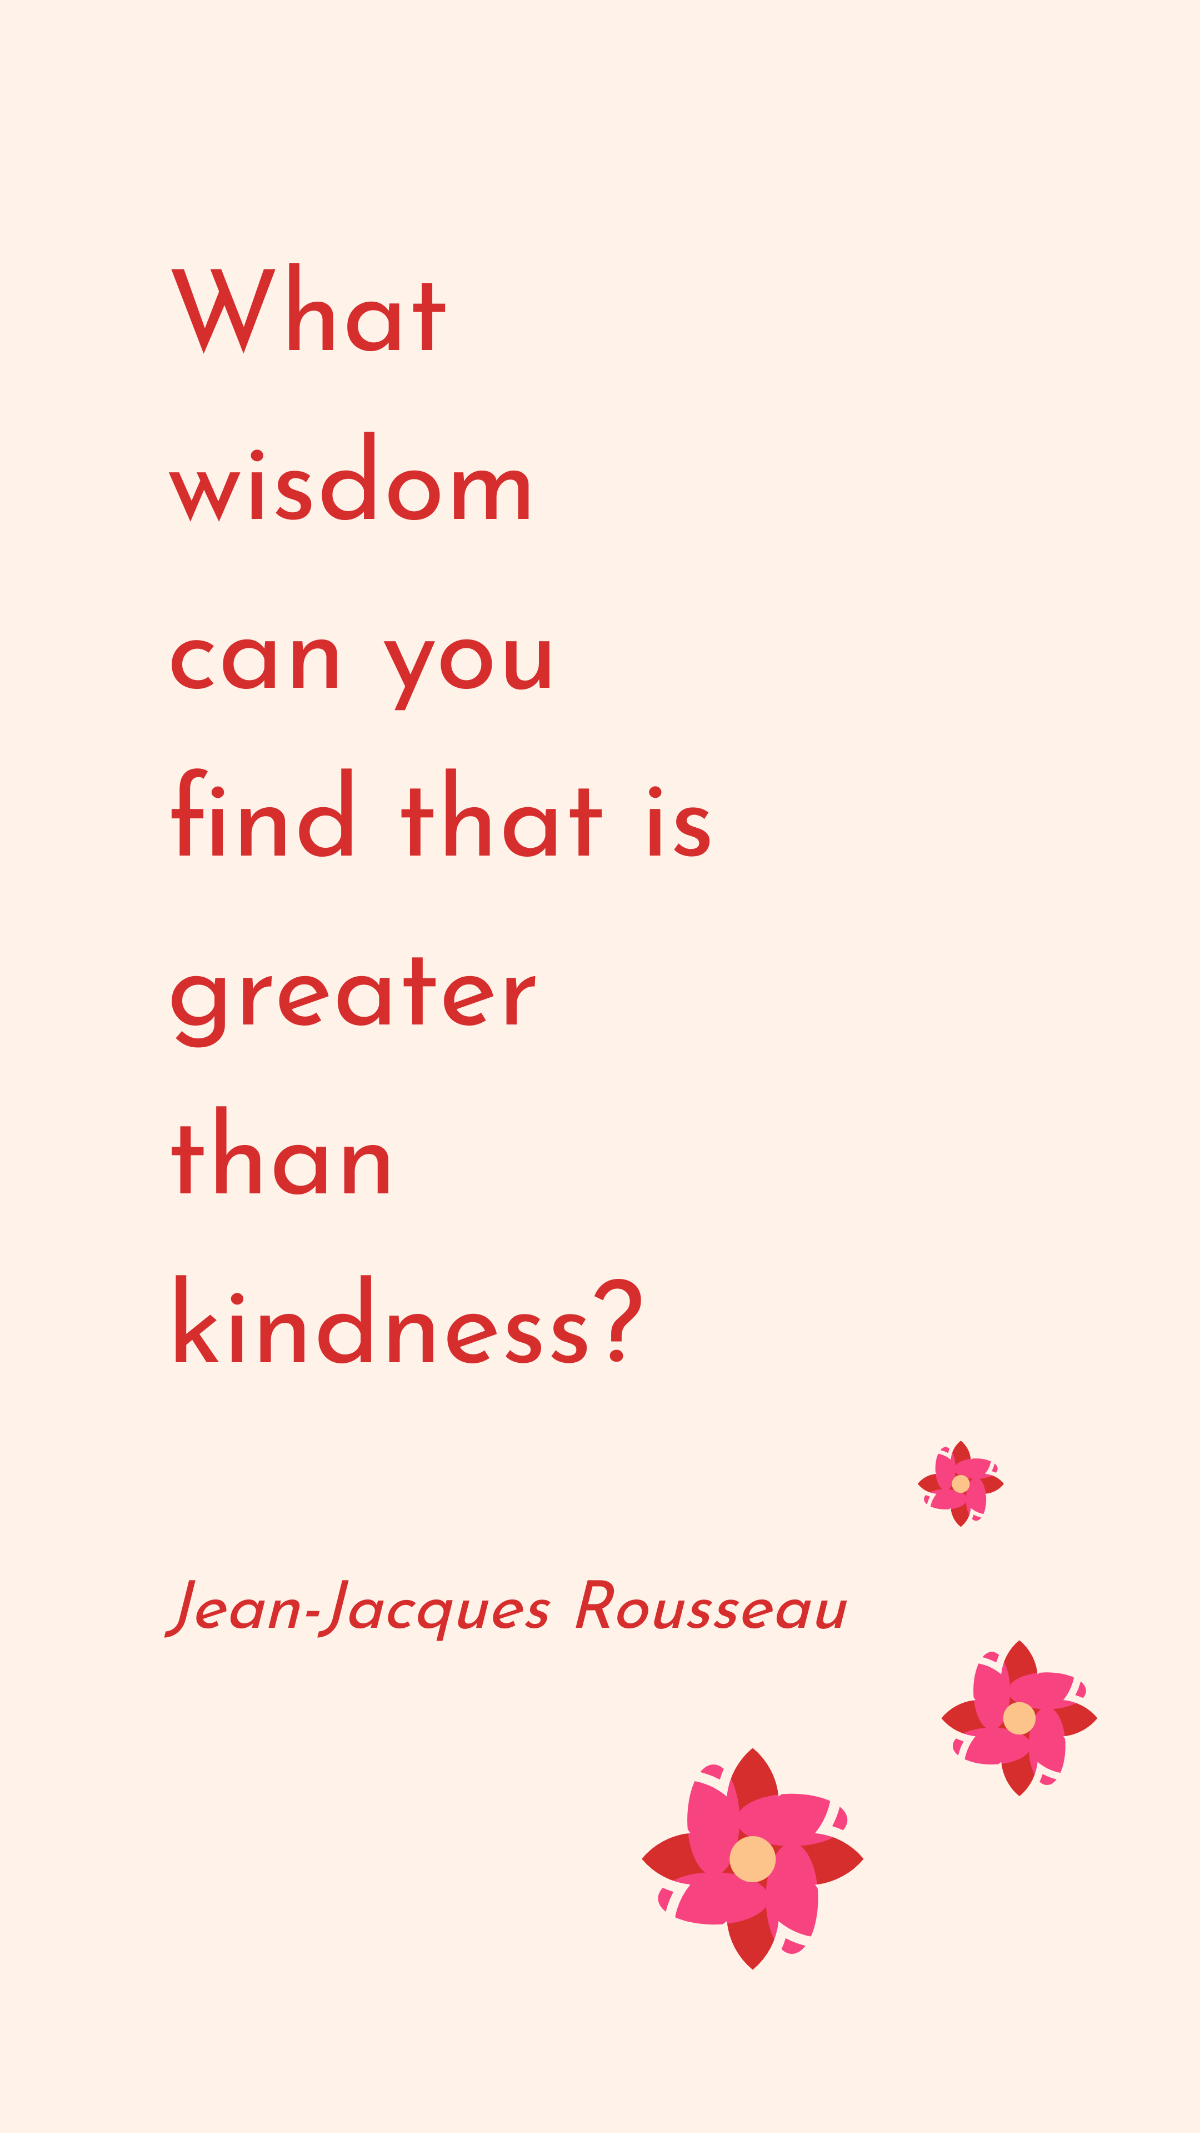 Jean-Jacques Rousseau - What wisdom can you find that is greater than kindness?